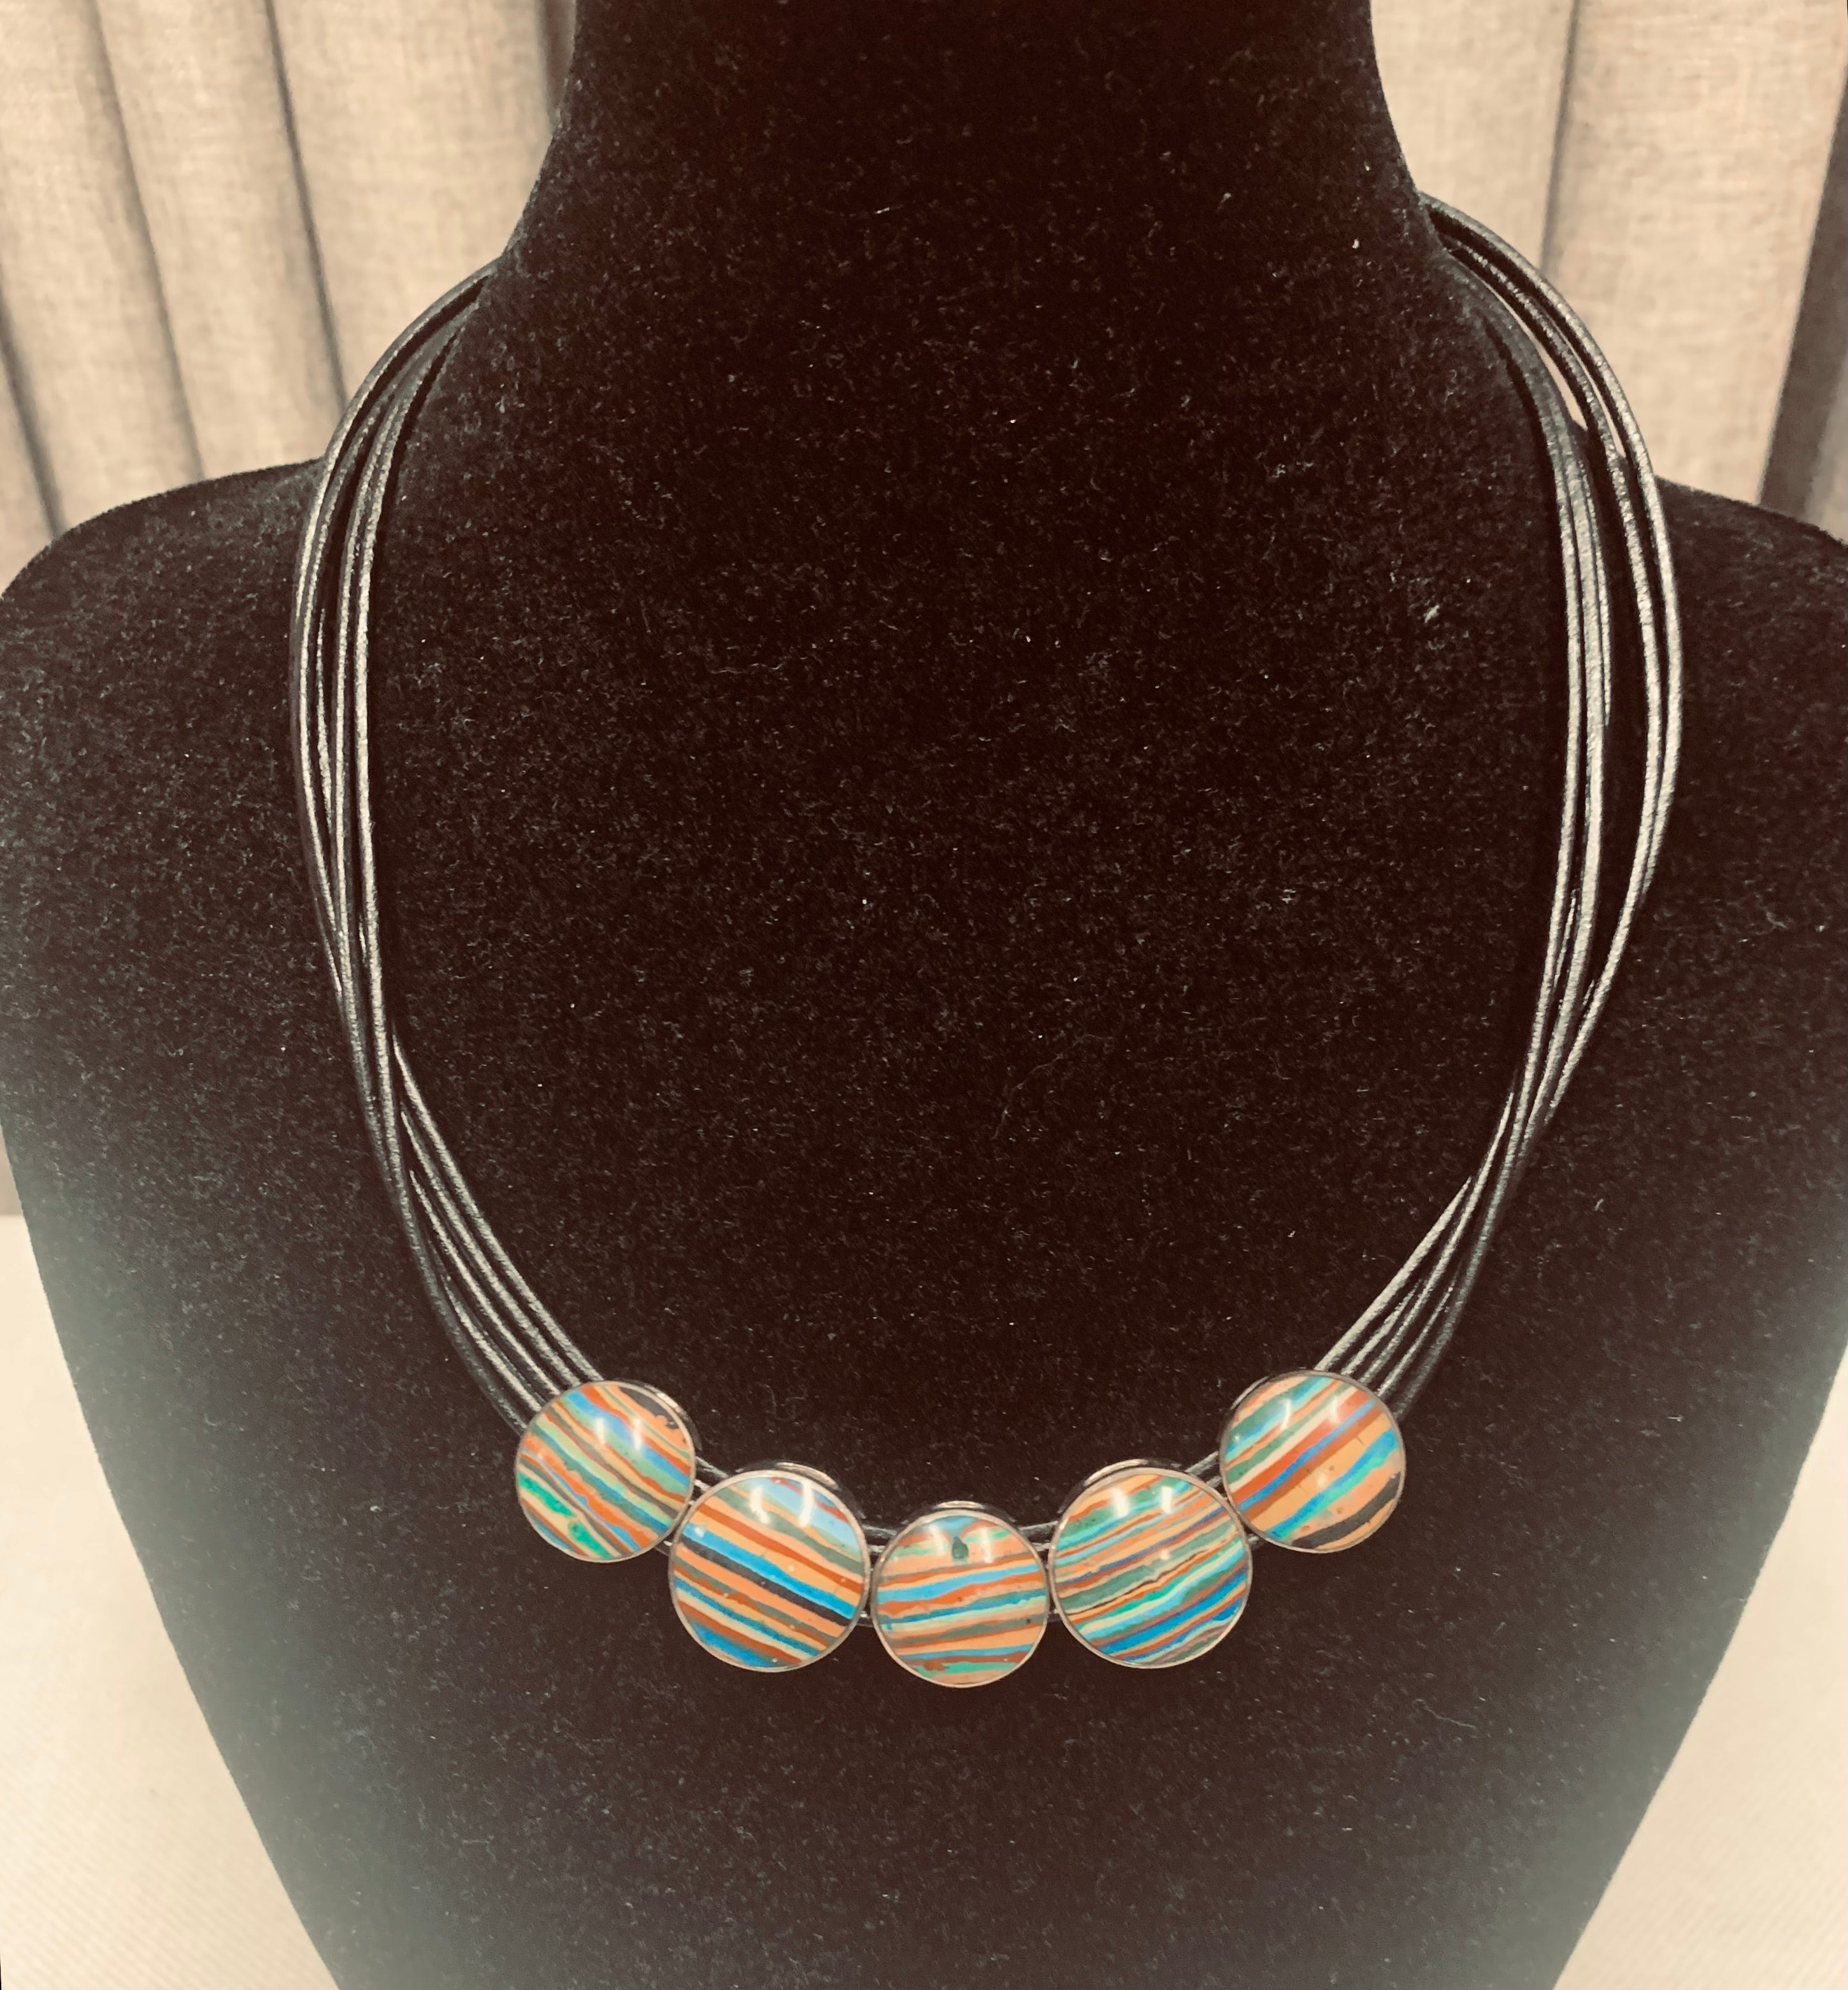 Vintage "Reversible" Rainbow Casillica and Turquoise Necklace